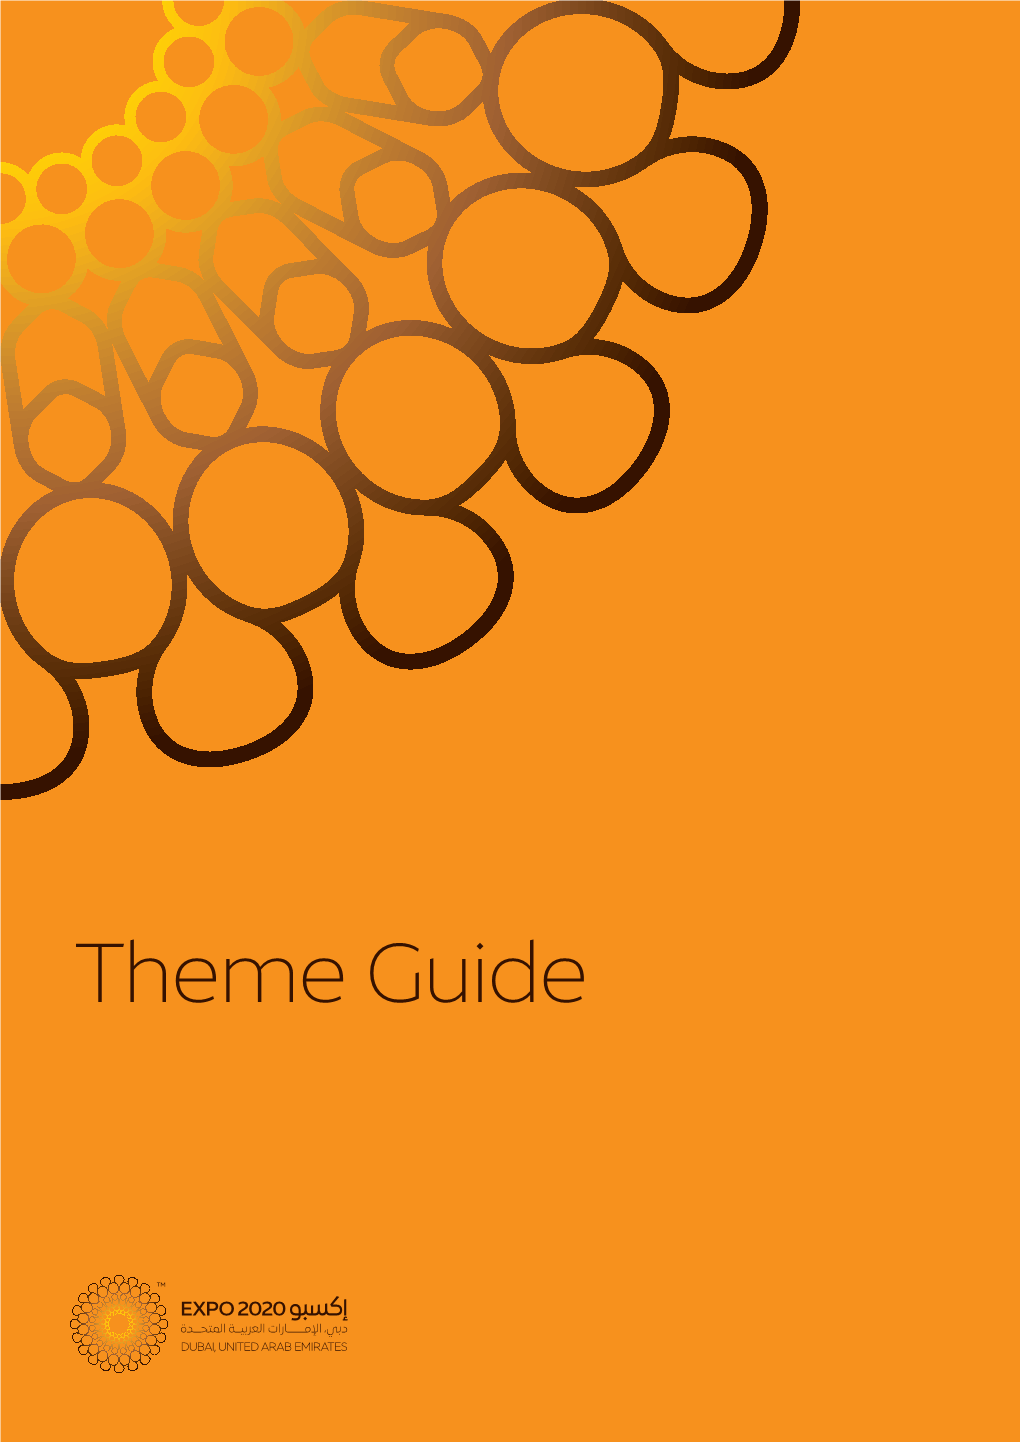 Theme Guide Unless Otherwise Expressly Indicated by Expo 2020 Dubai®, Copyright of the Content of This Guide Is Owned by Expo 2020 Dubai